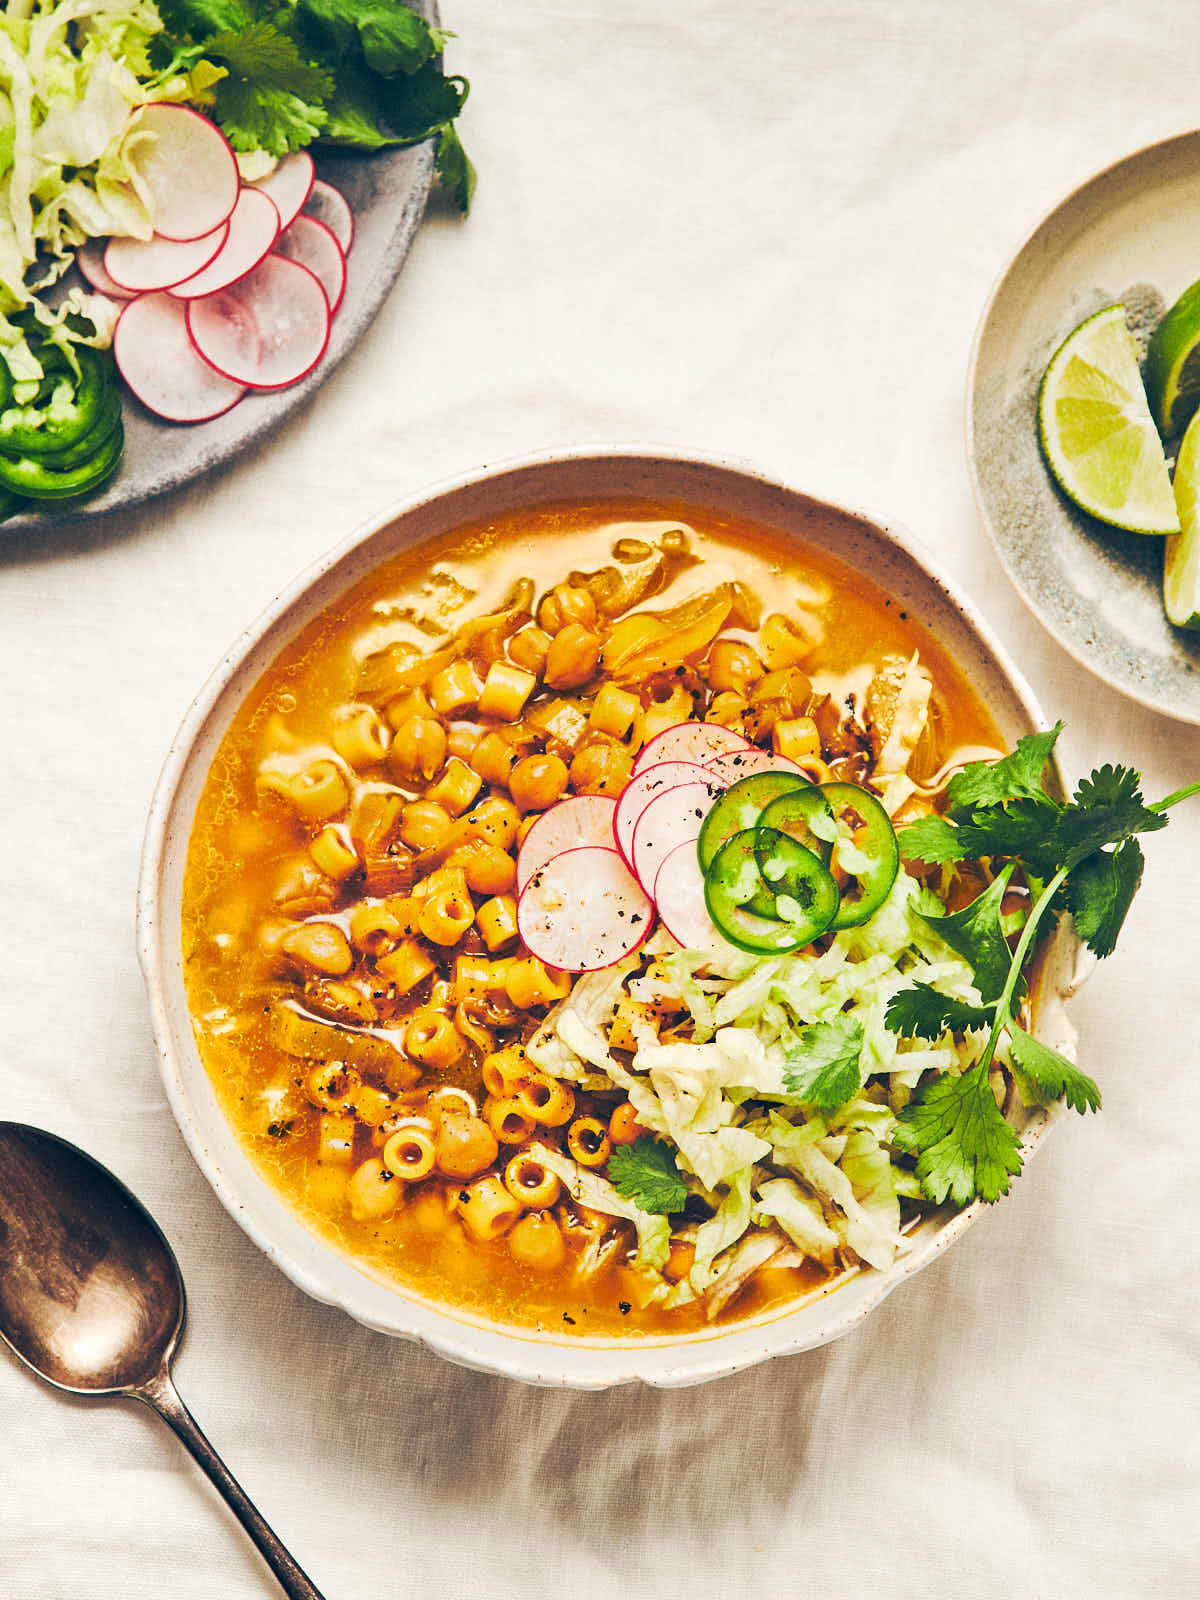 A bowl of chickpea (garbanzo bean) noodle soup topped with shredded lettuce, jalapenos and radish, sitting on a white linen tablecloth